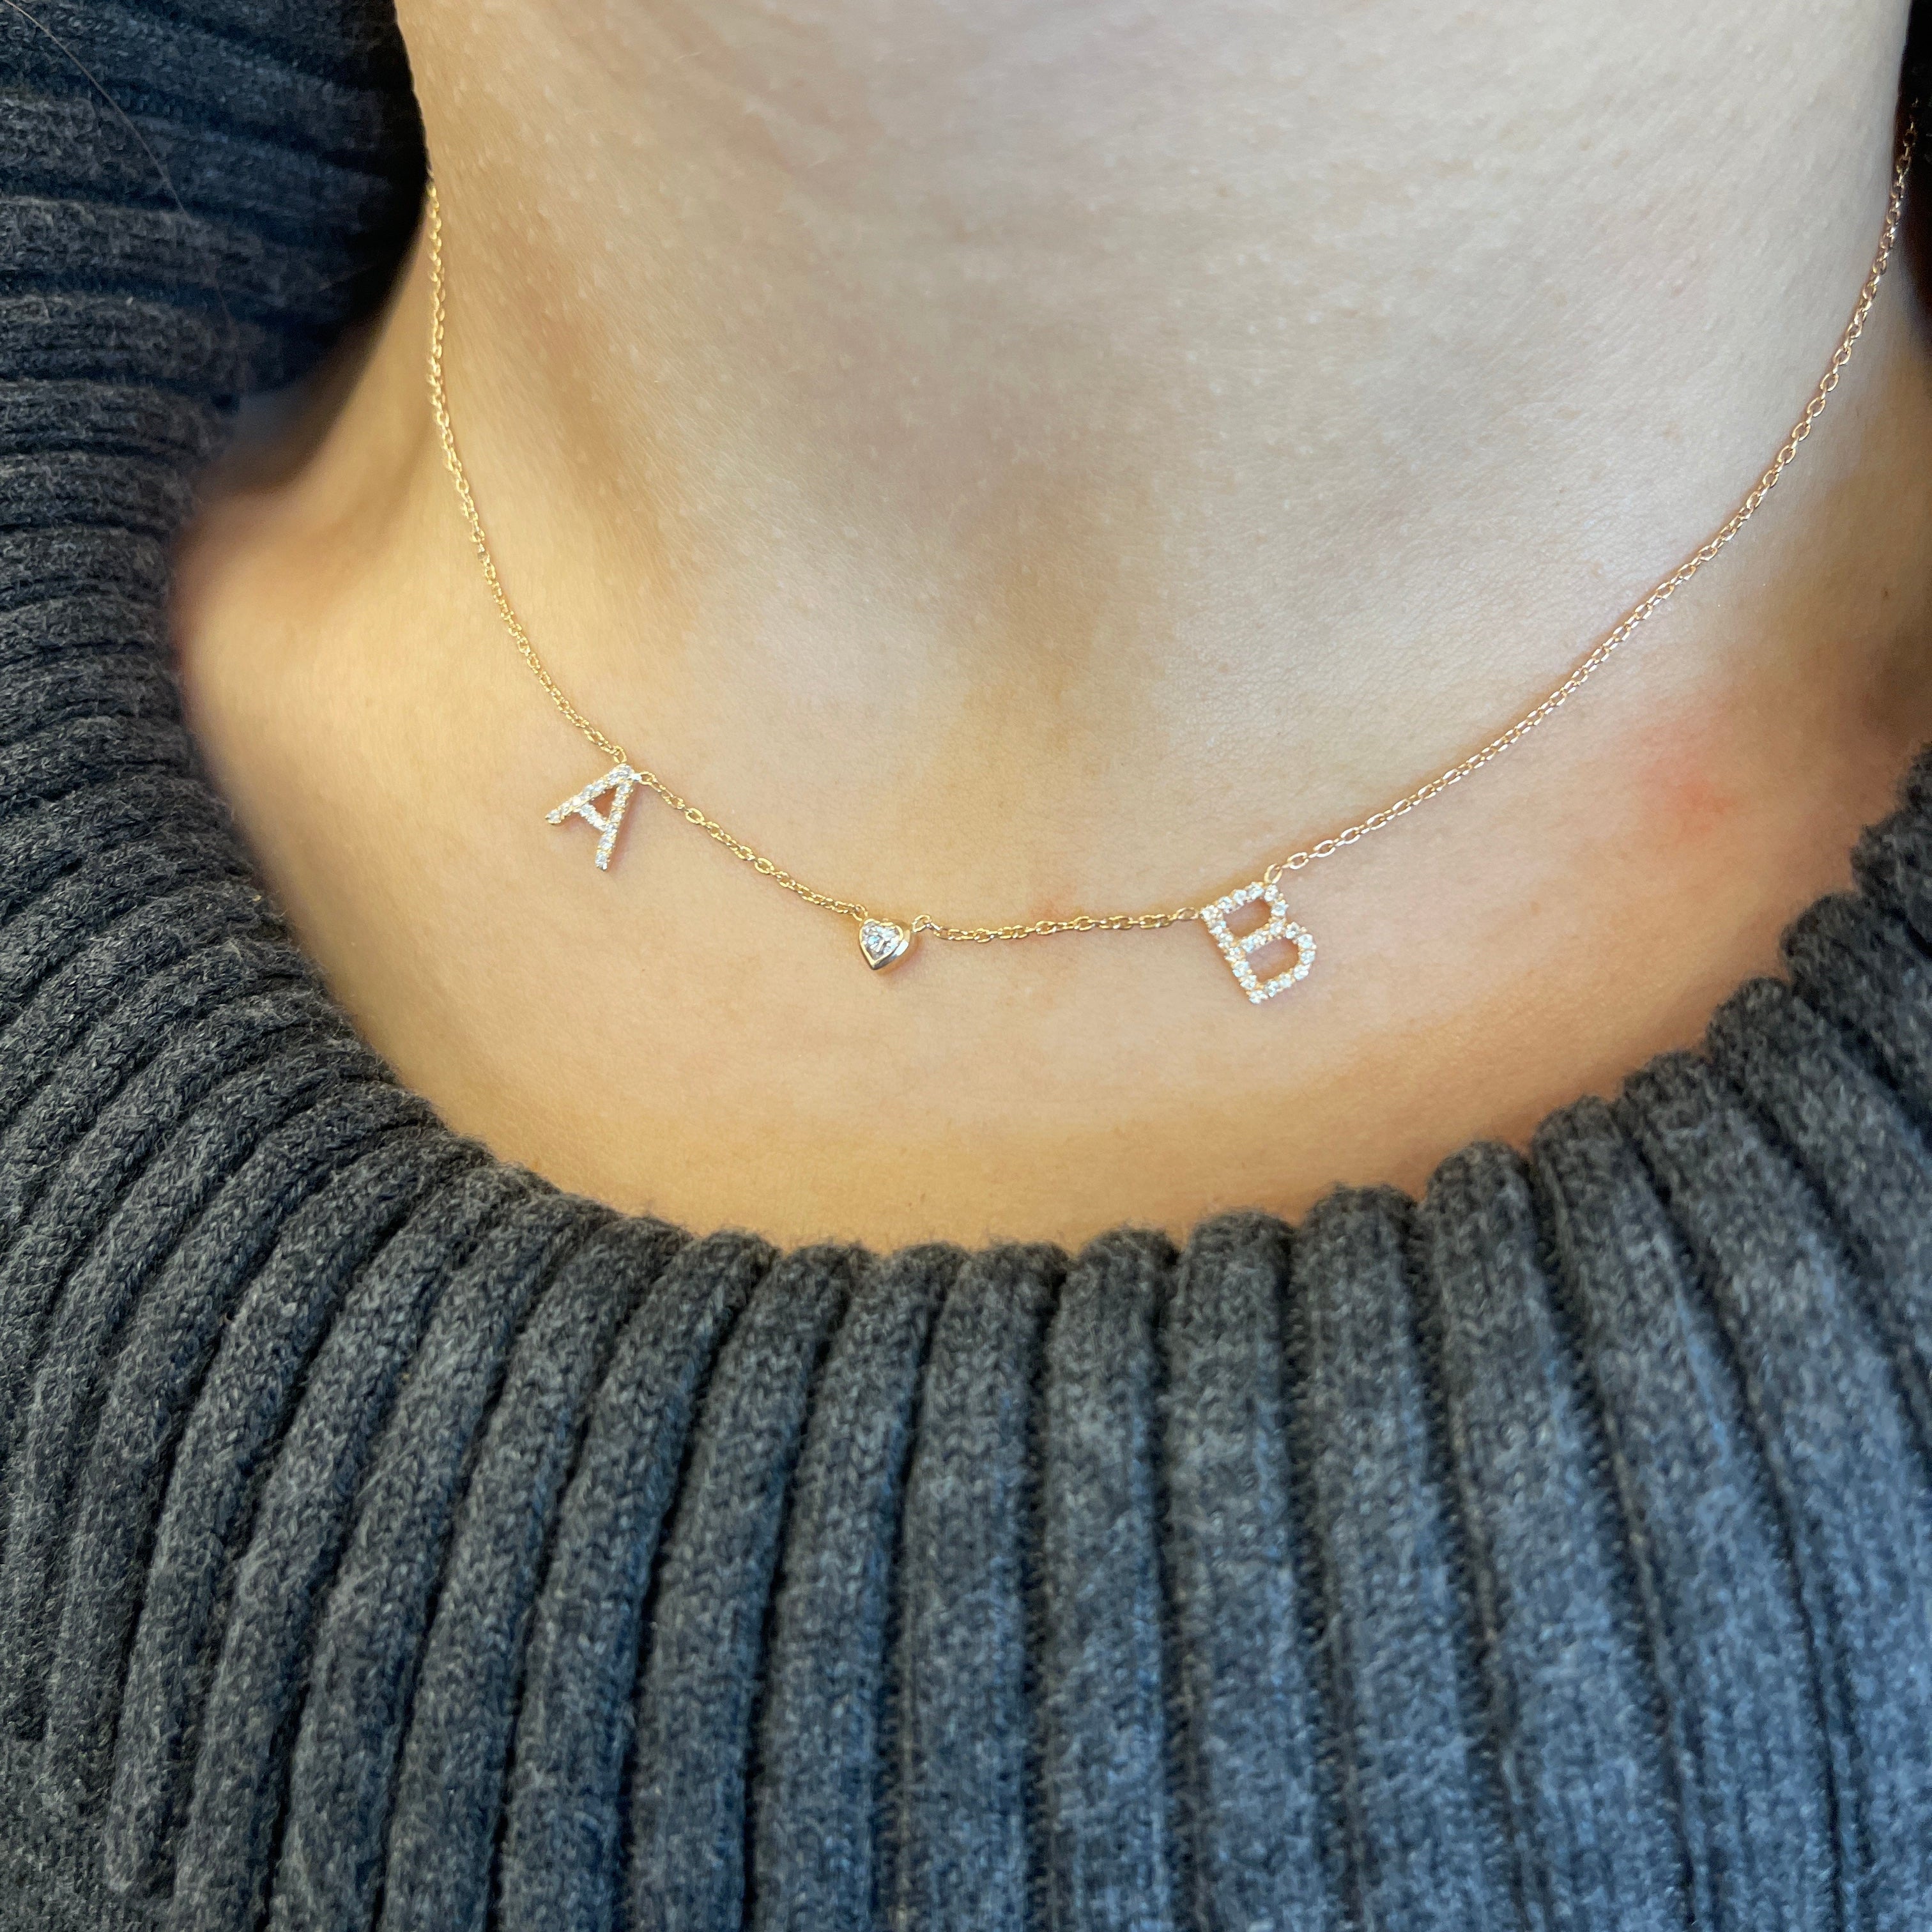 Custom Diamond Couple's Initials and Charm Necklace